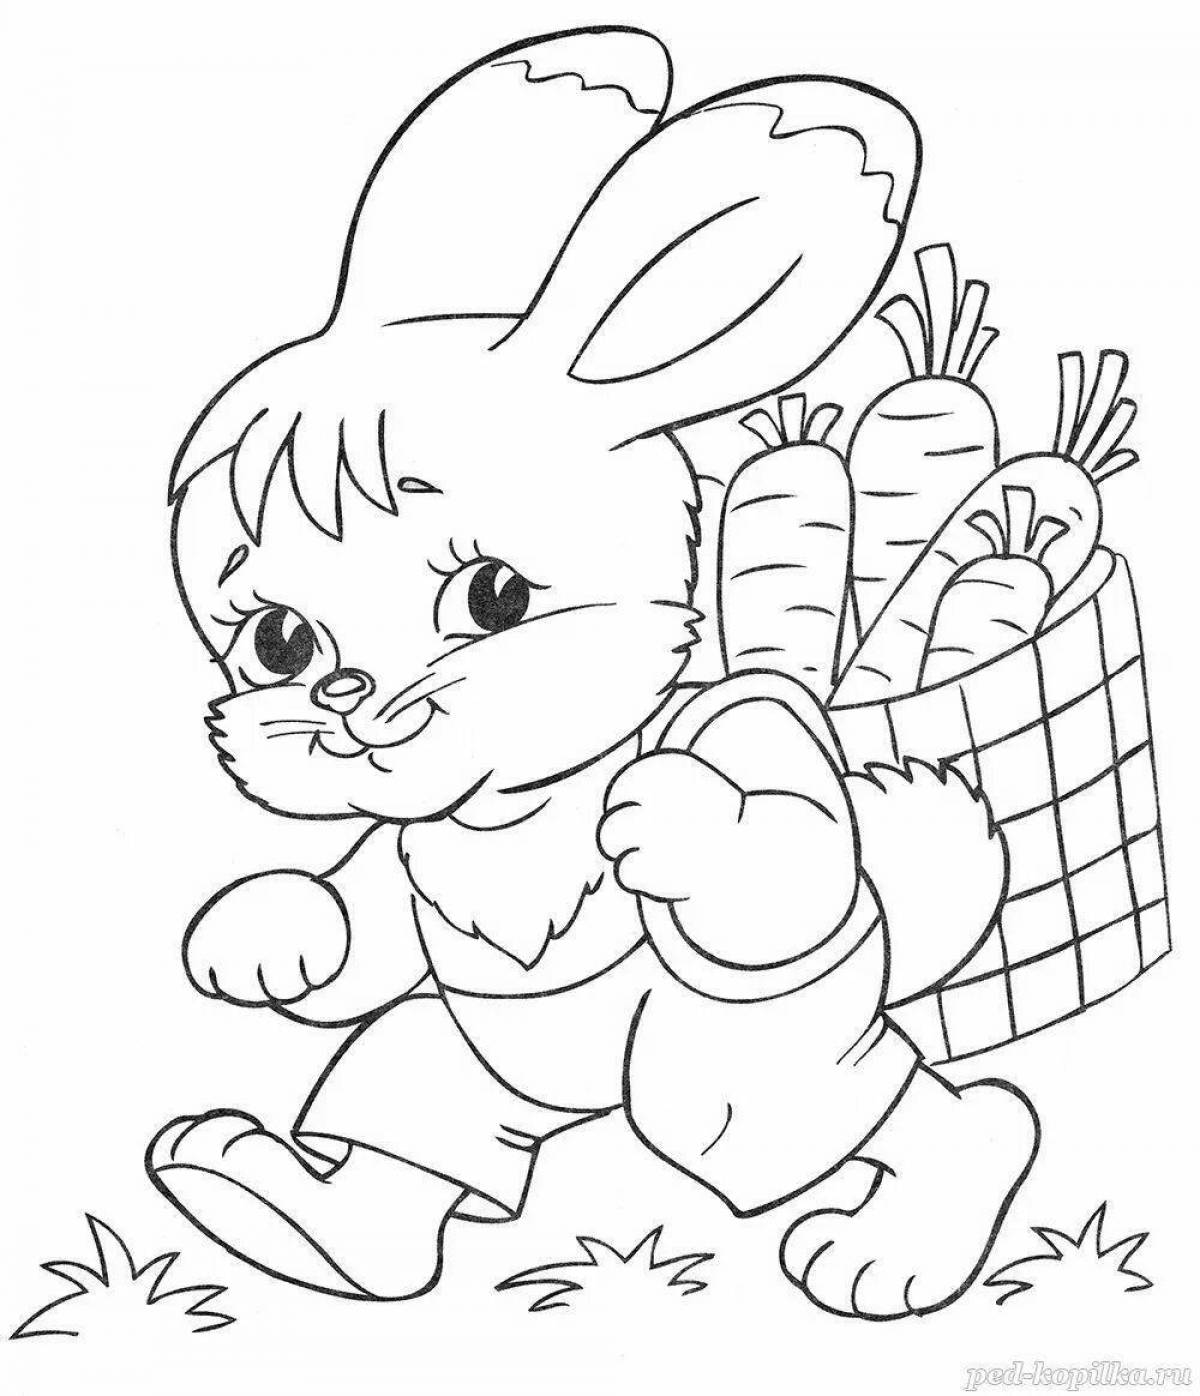 Great rabbit coloring book for kids 2-3 years old